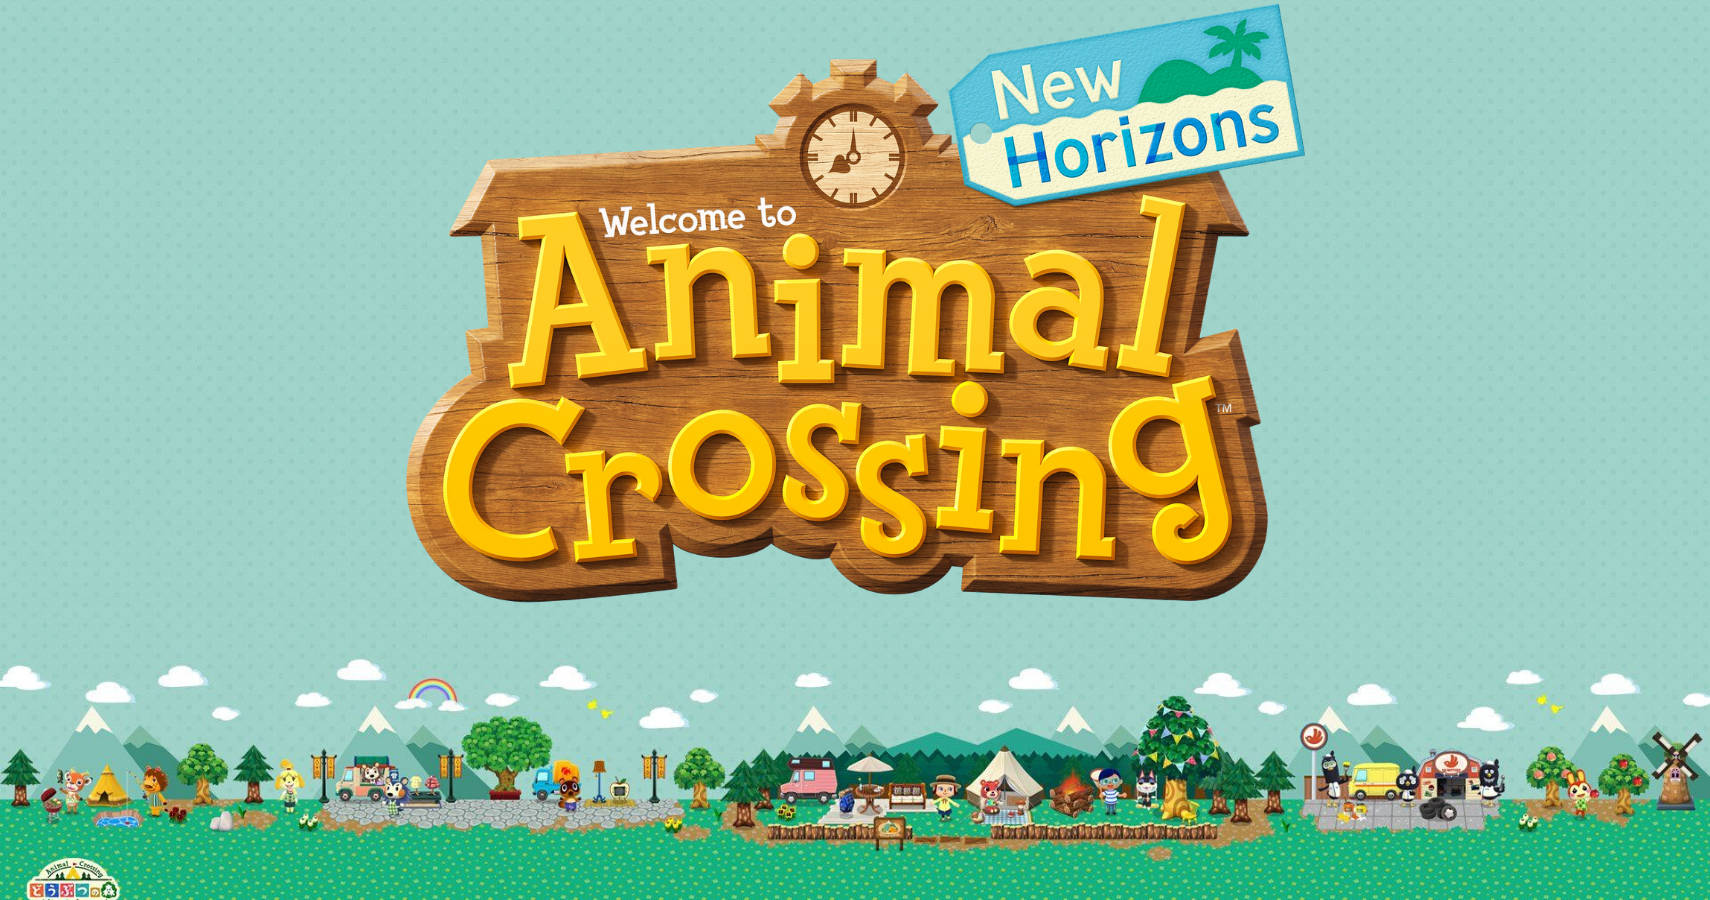 The next update for Animal Crossing: New Horizons will be announced on October 15